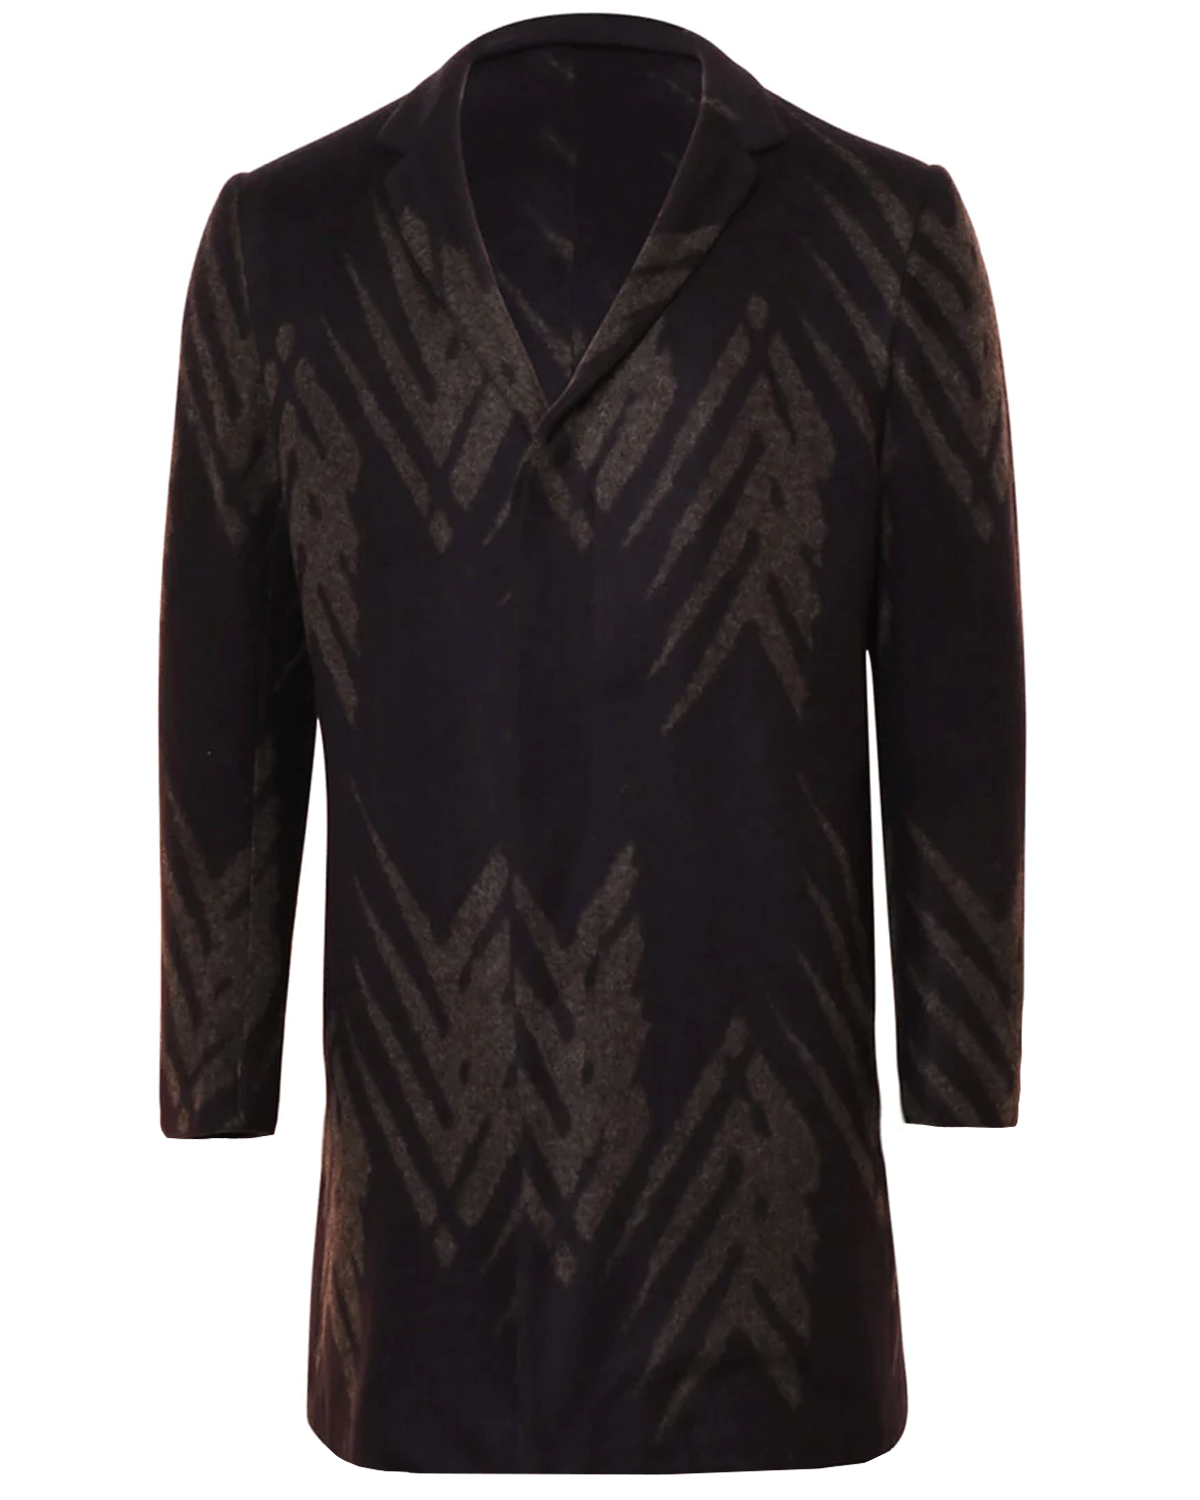 Navy and Grey Palm Print Cashmere Blend Overcoat